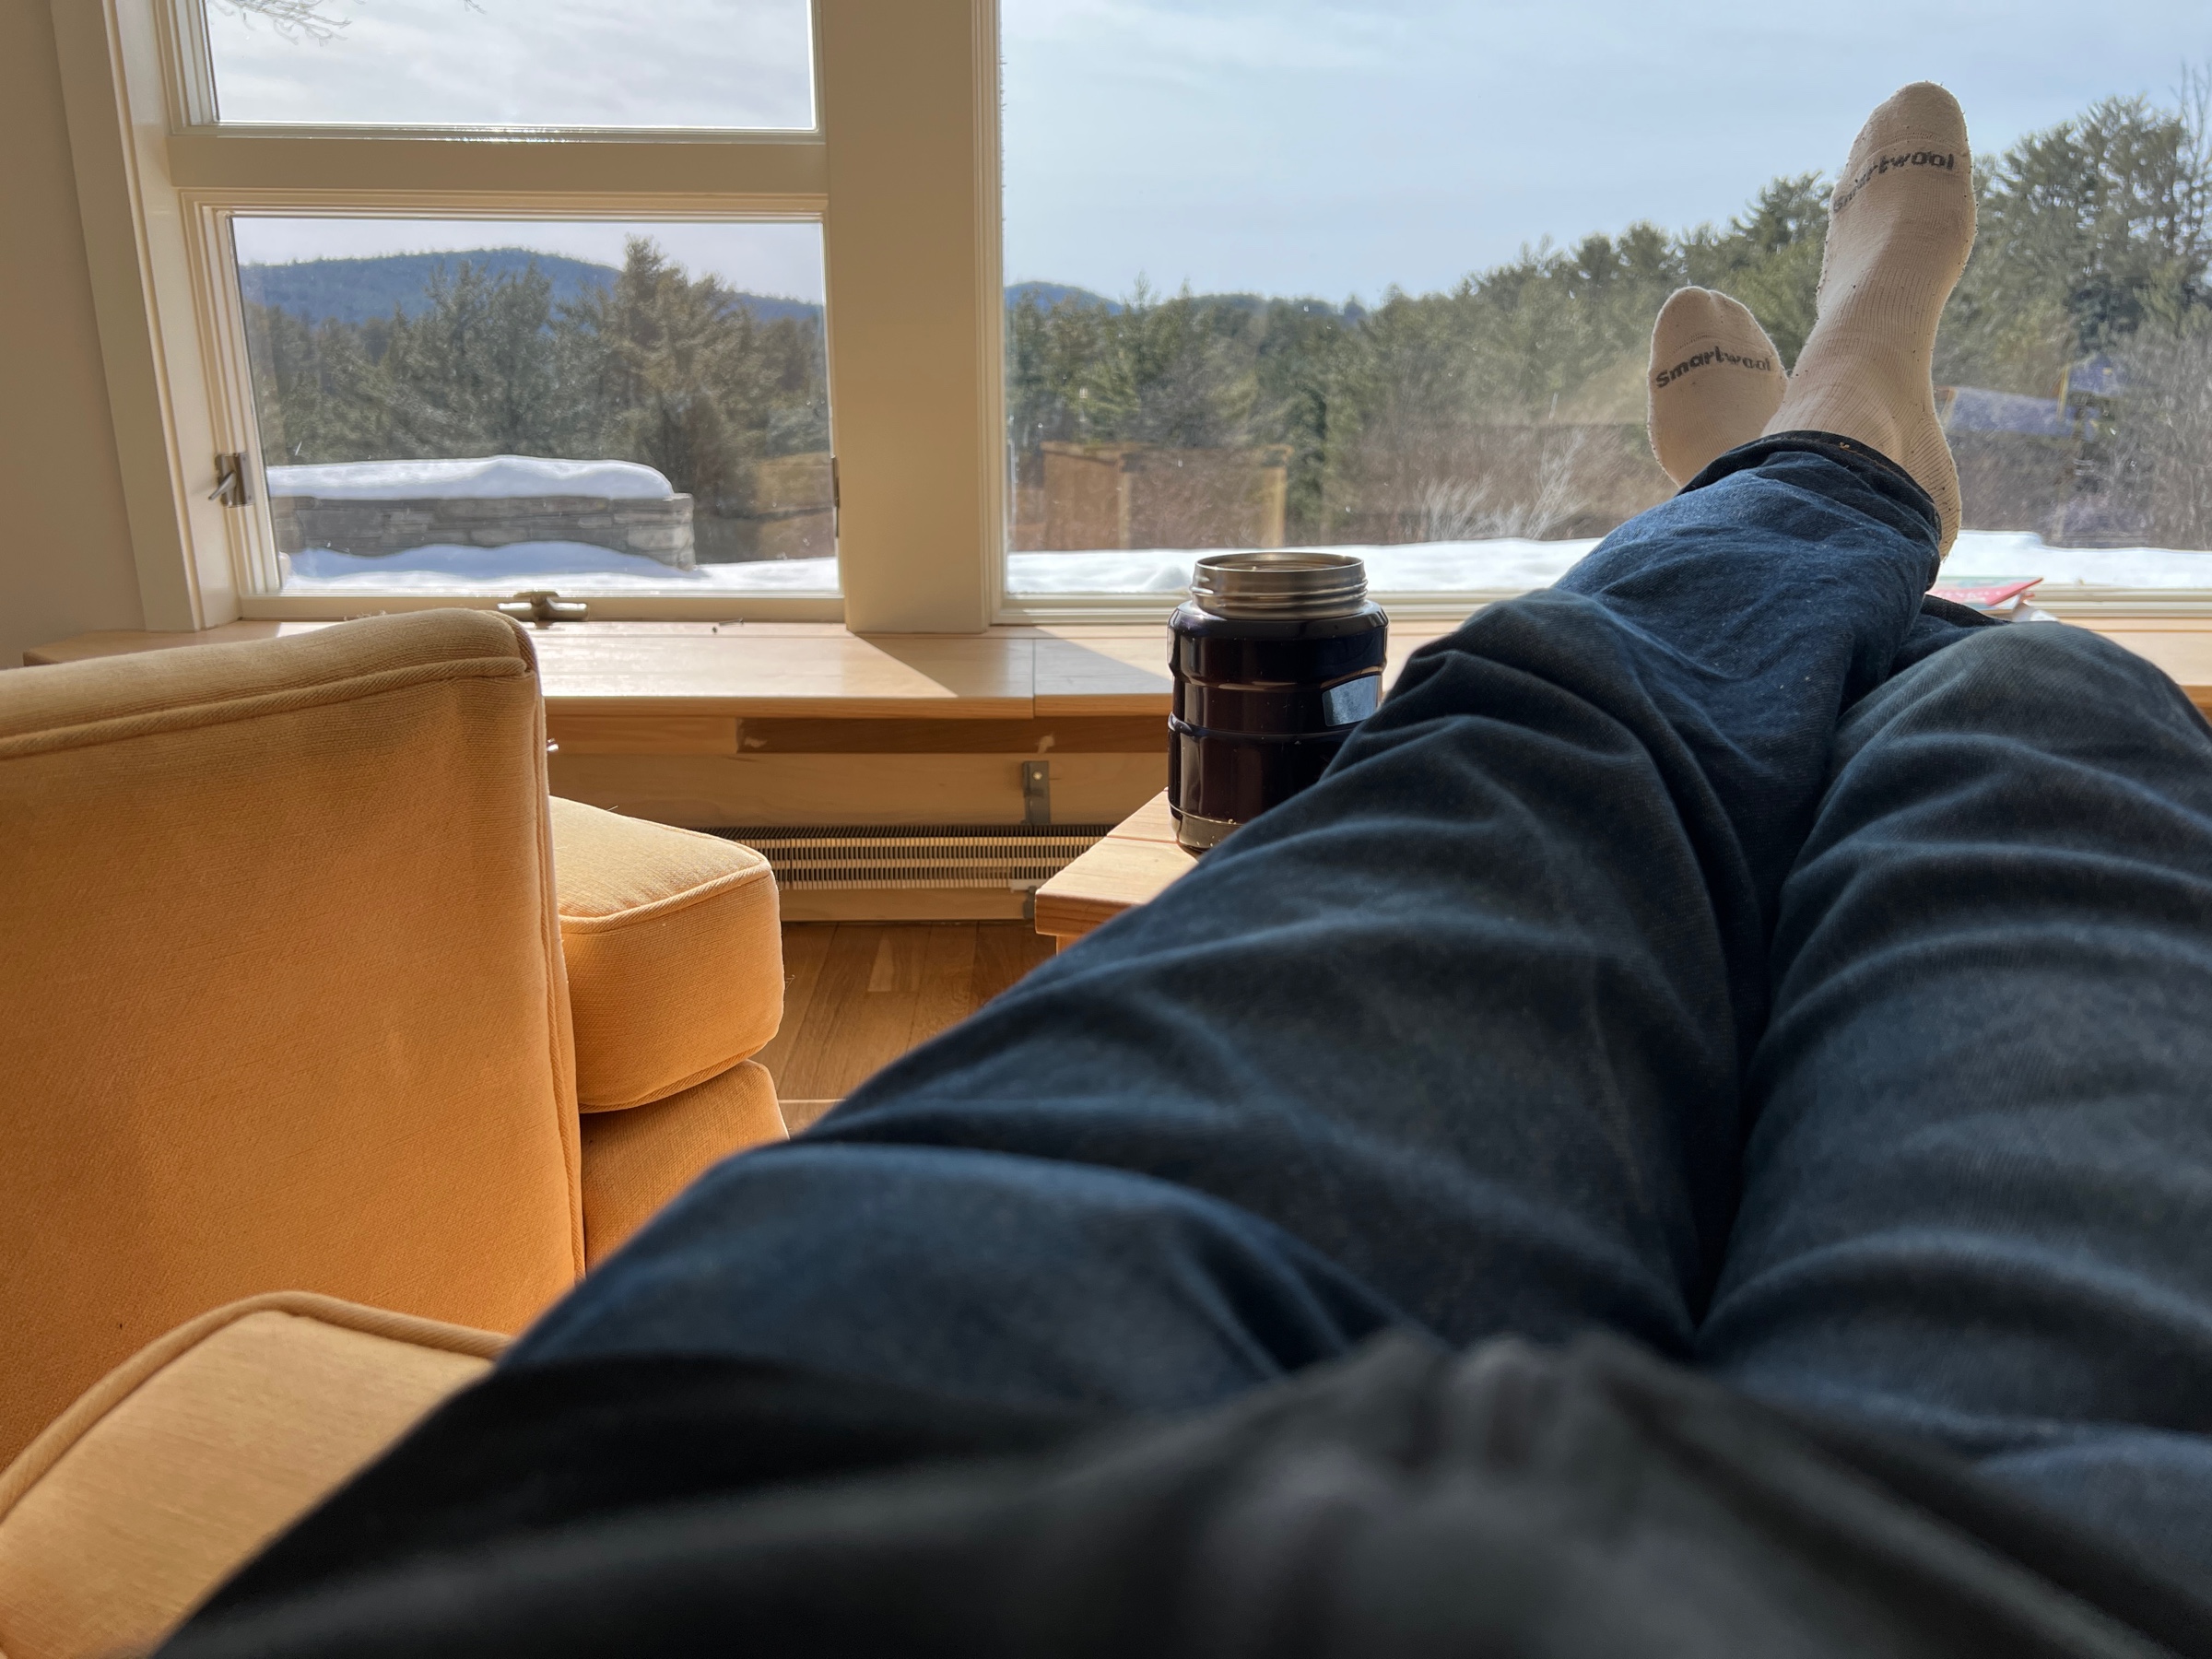 my feet up on an ottoman next to a cup of coffee with a view of a snowy patio and forest in the background